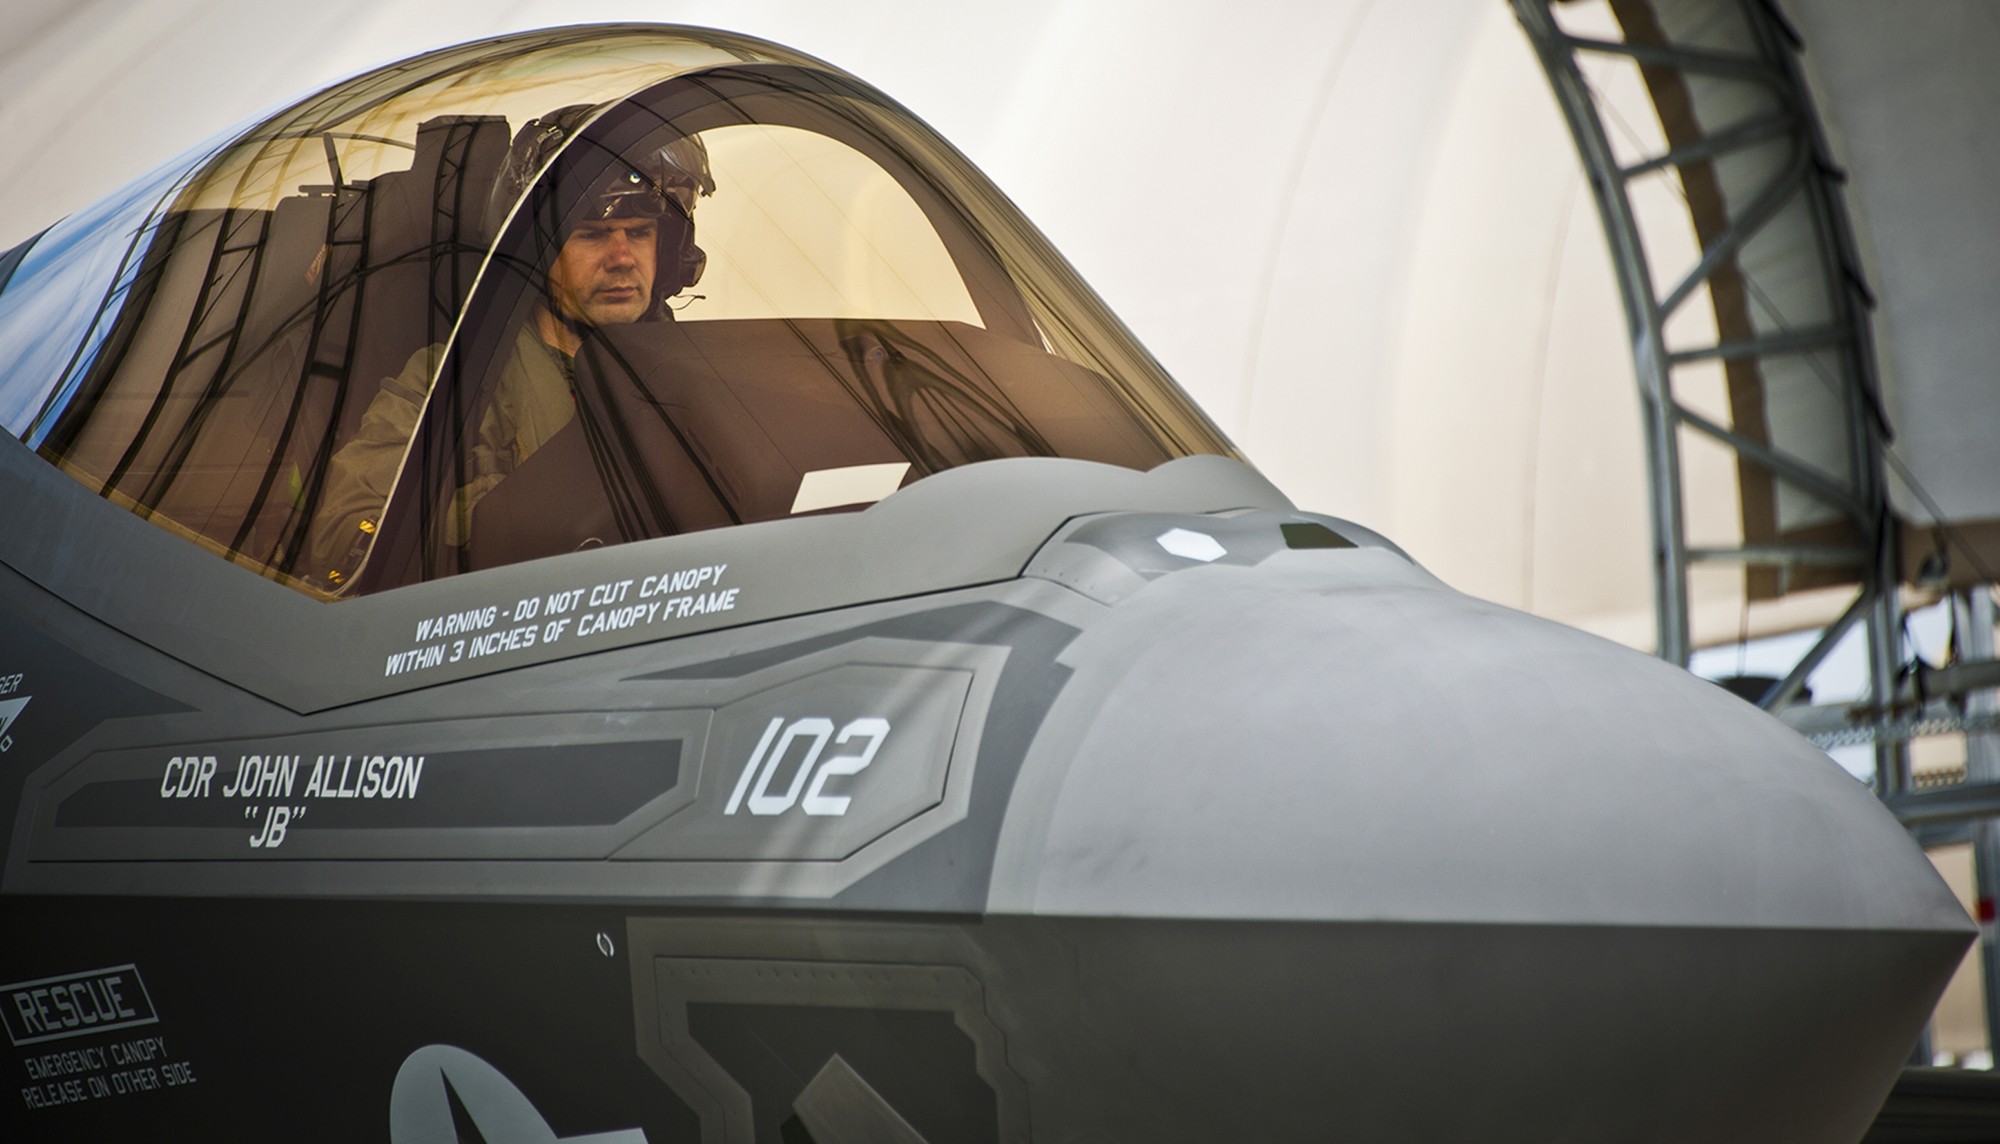 vfa-101 grim reapers strike fighter squadron us navy f-35c lightning jsf frs 04 eglin afb